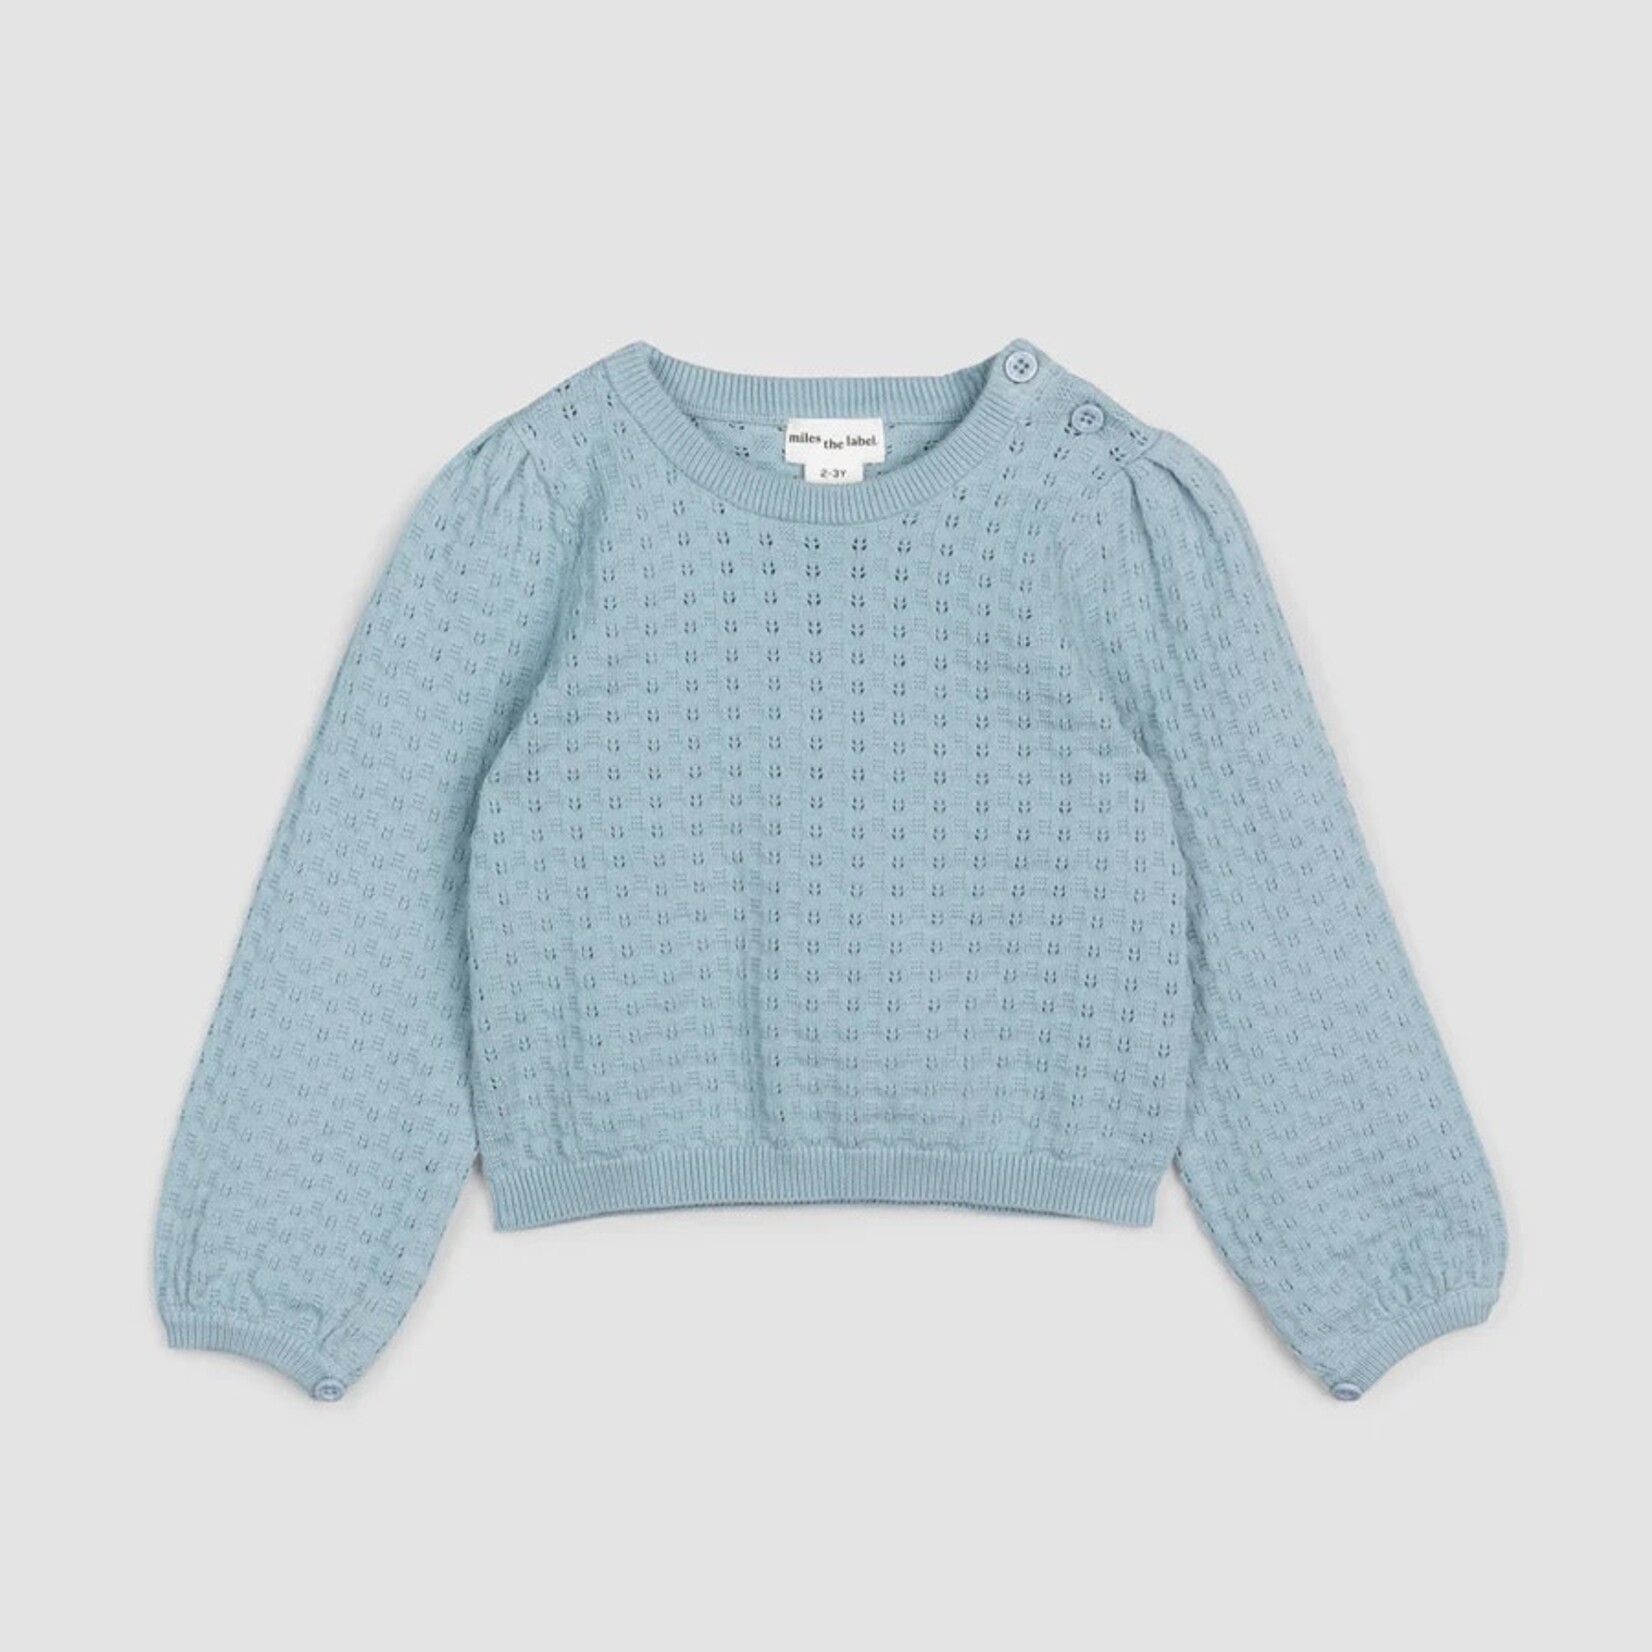 Miles the label MILES THE LABEL - Blue knit sweater